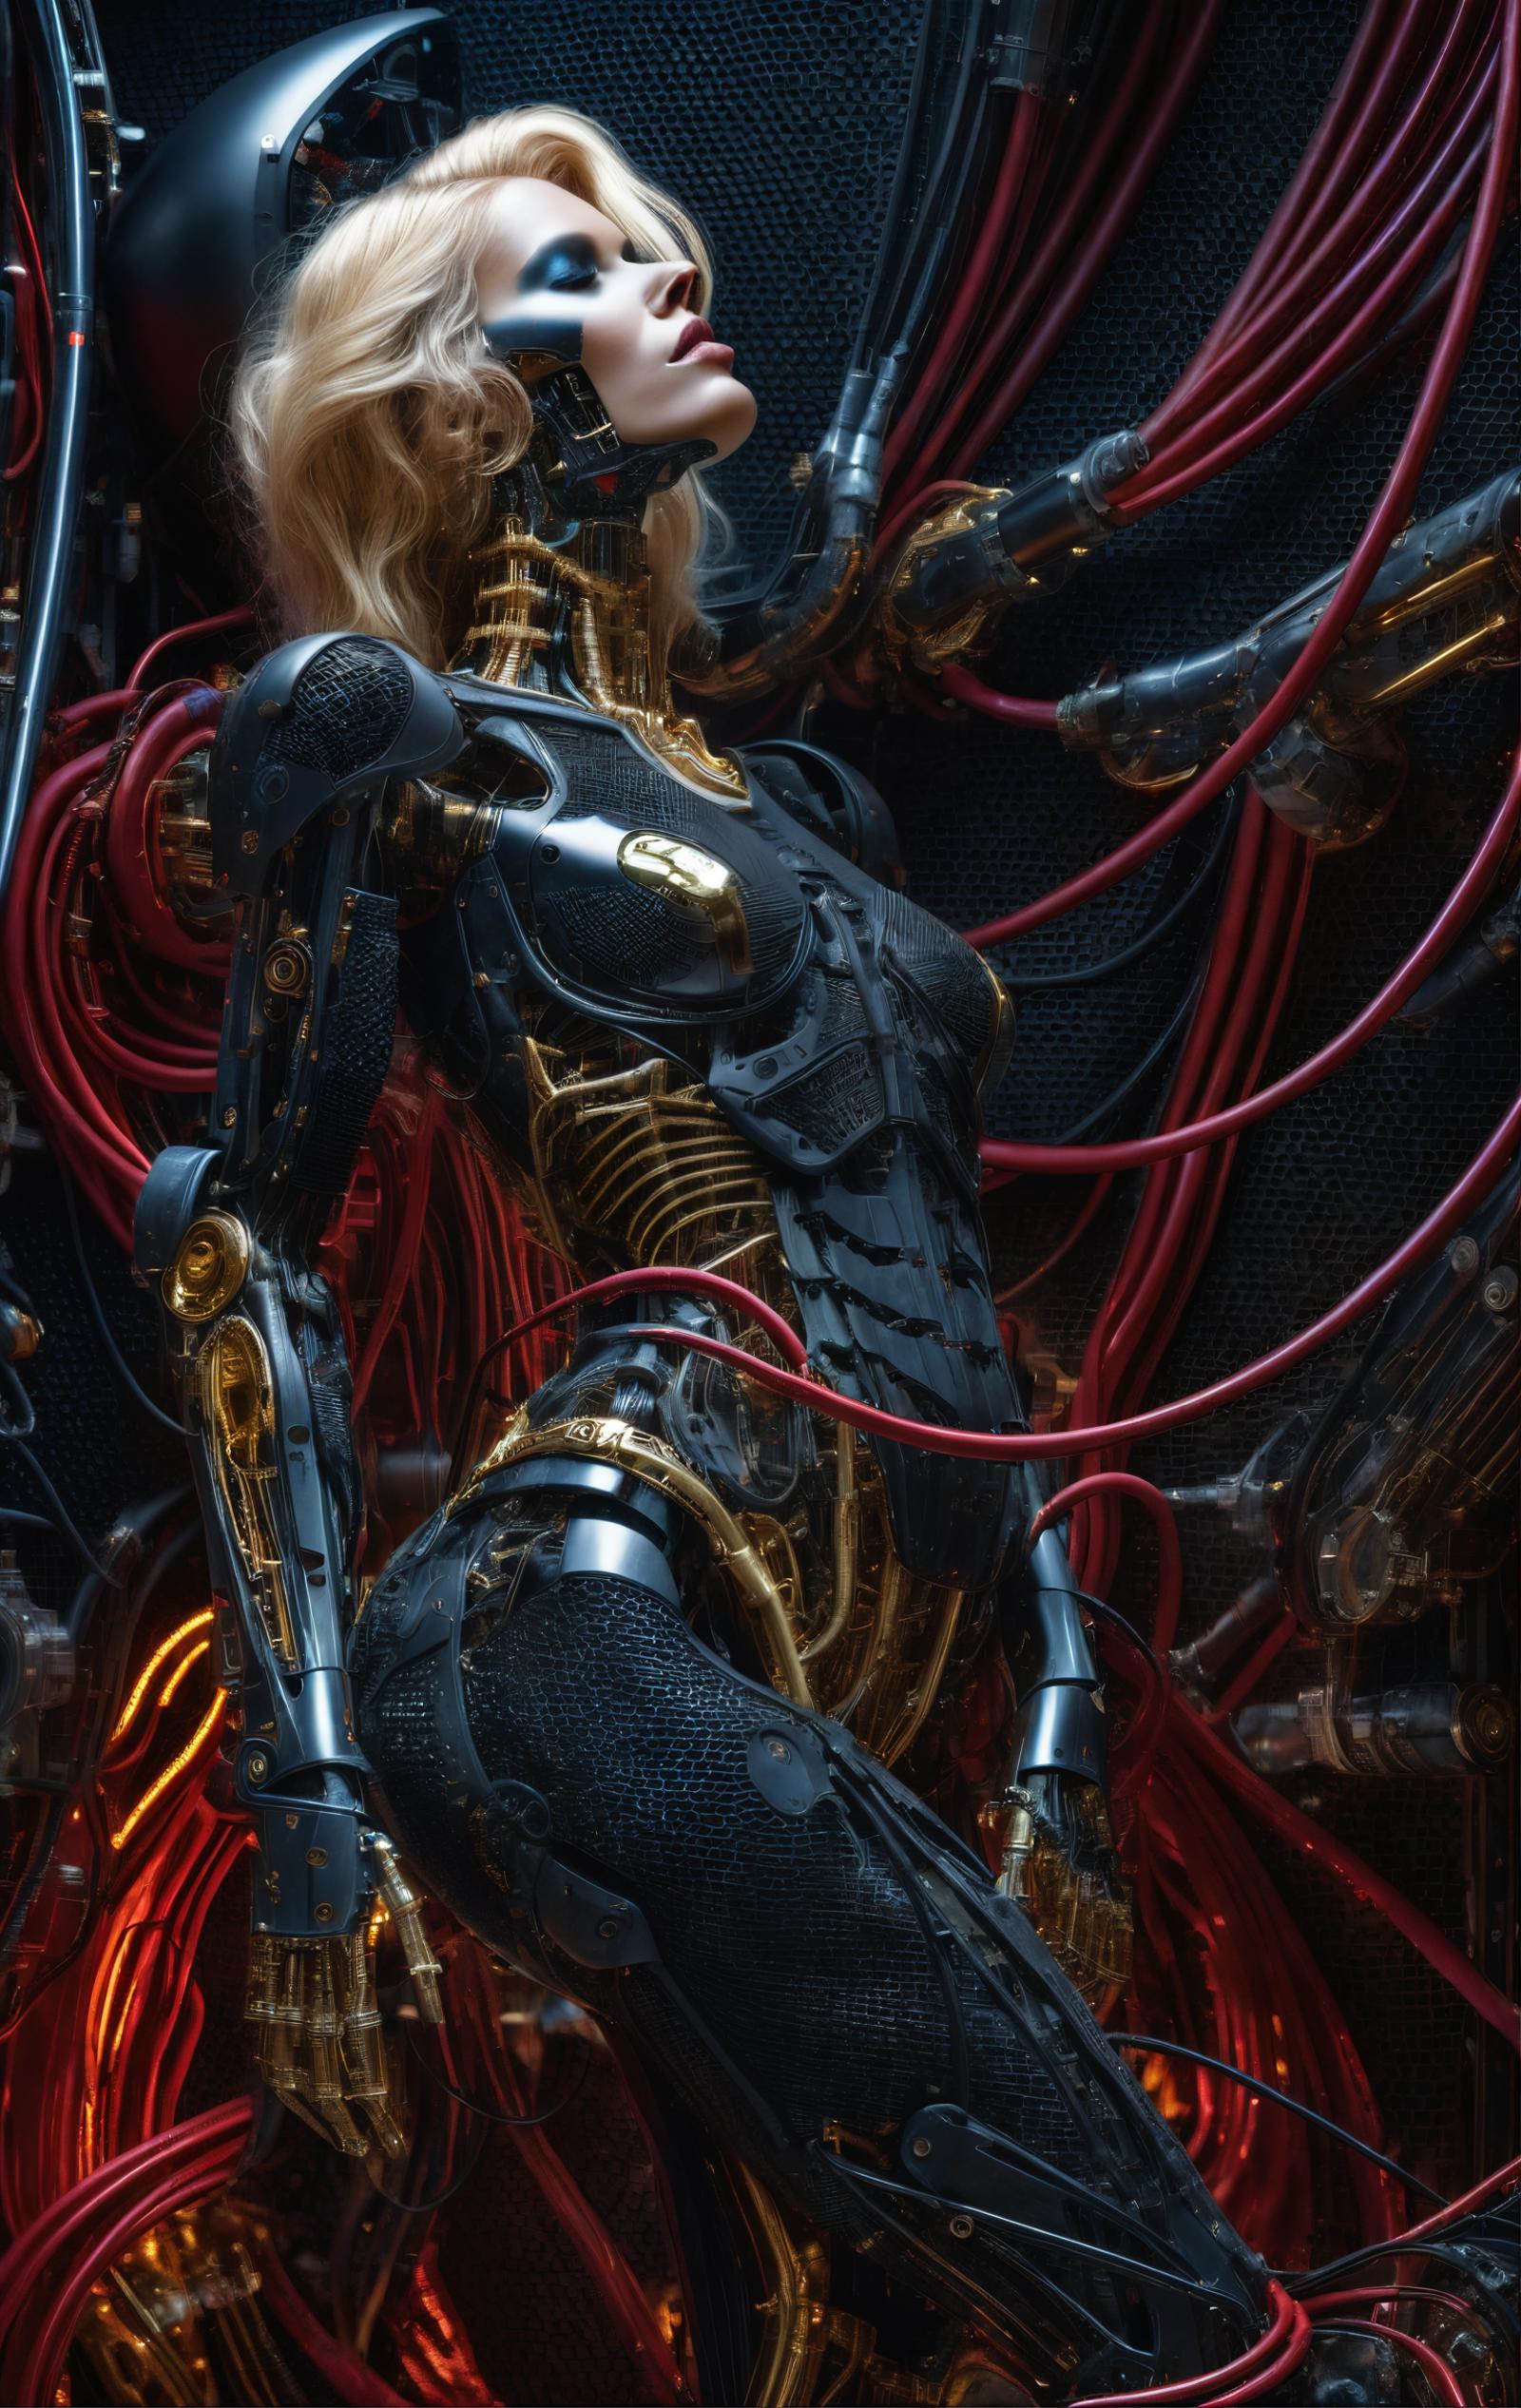 A robotic woman with a gold and black suit and wires covering her body.